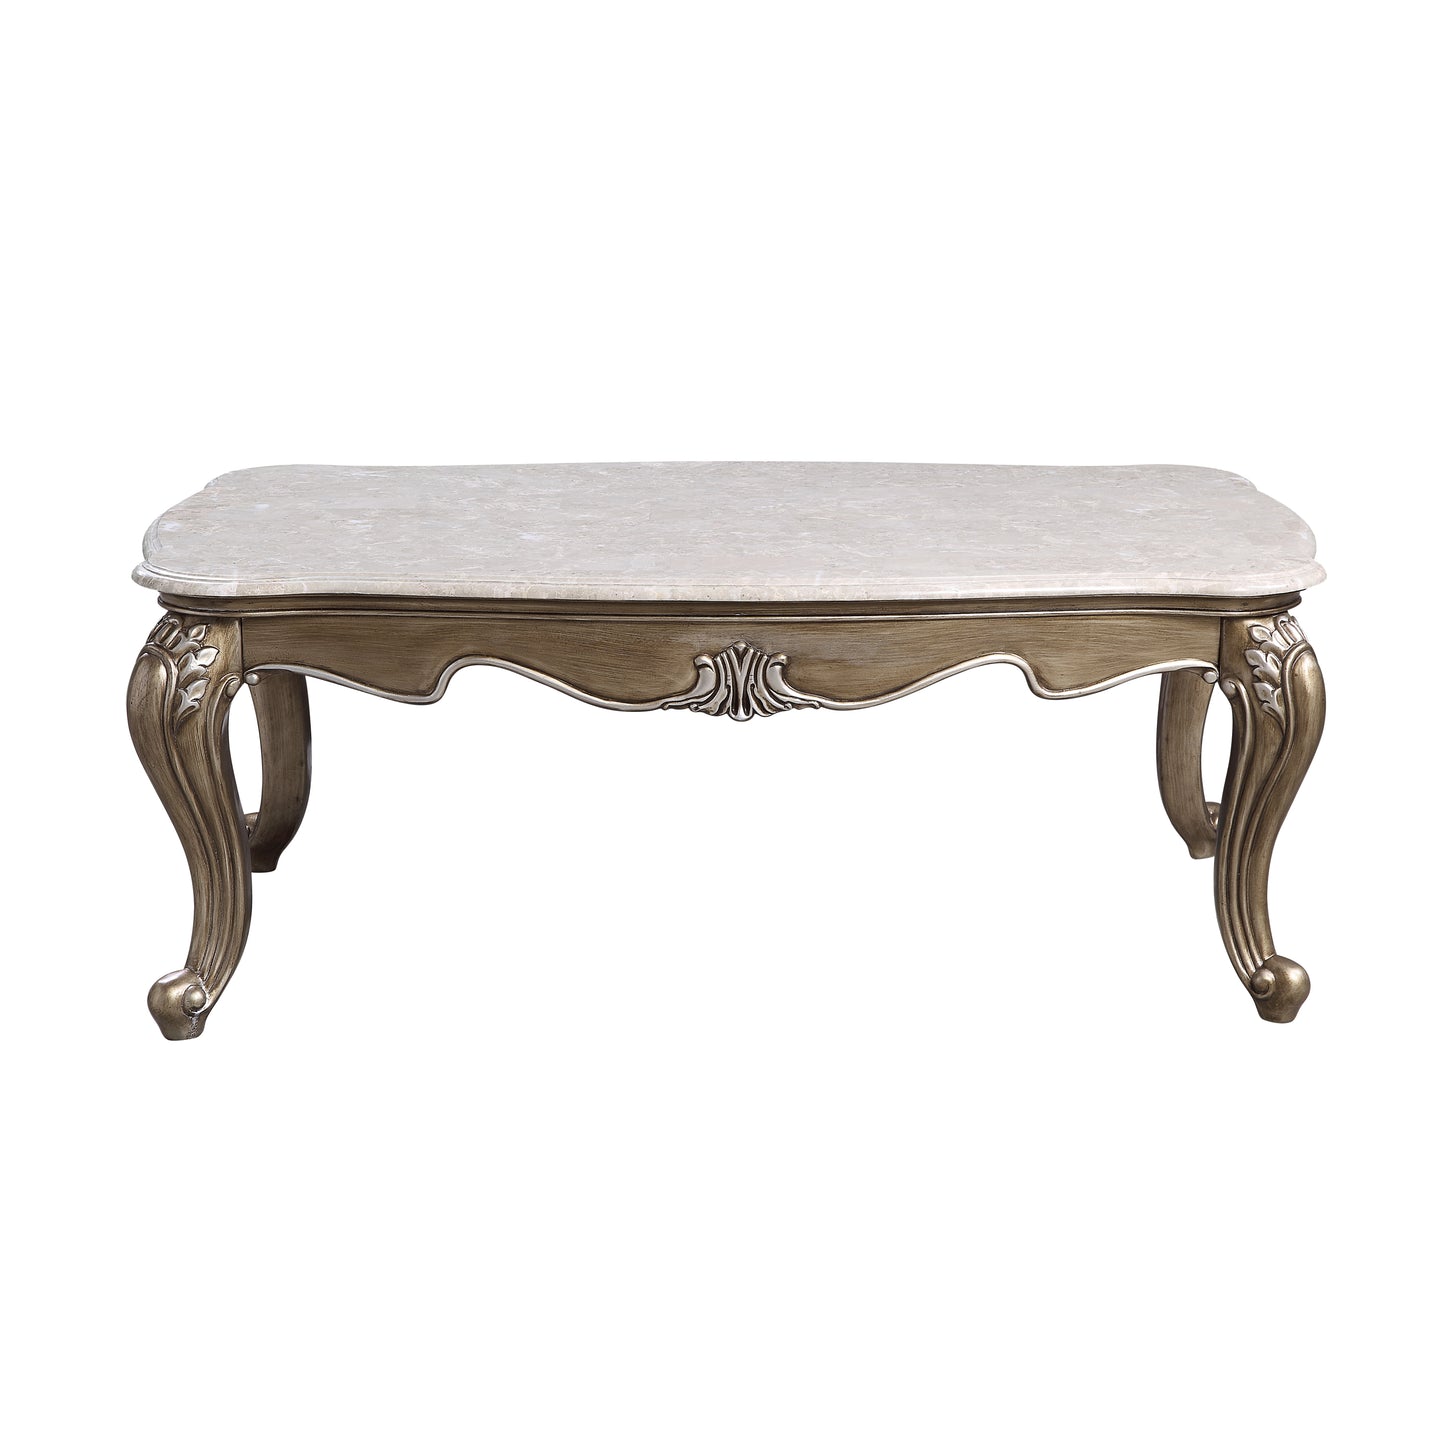 Elozzol Marble Top Coffee Table with Antique Bronze Finish LV00302